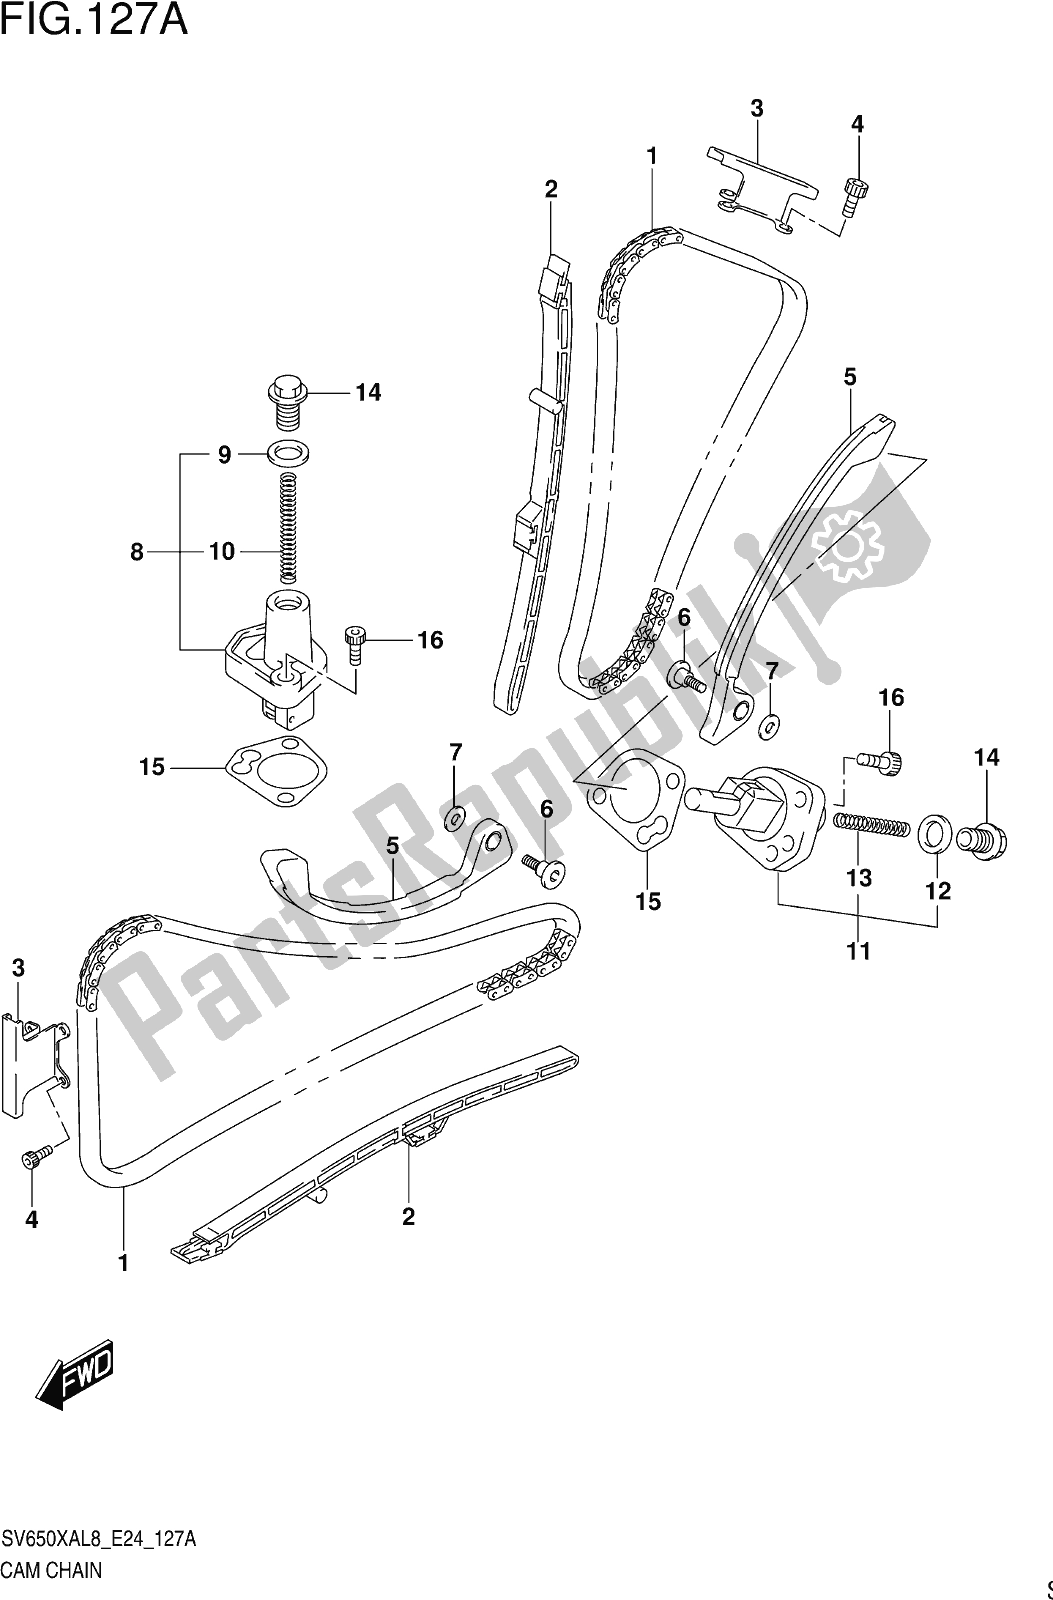 All parts for the Fig. 127a Cam Chain of the Suzuki SV 650 XA 2018